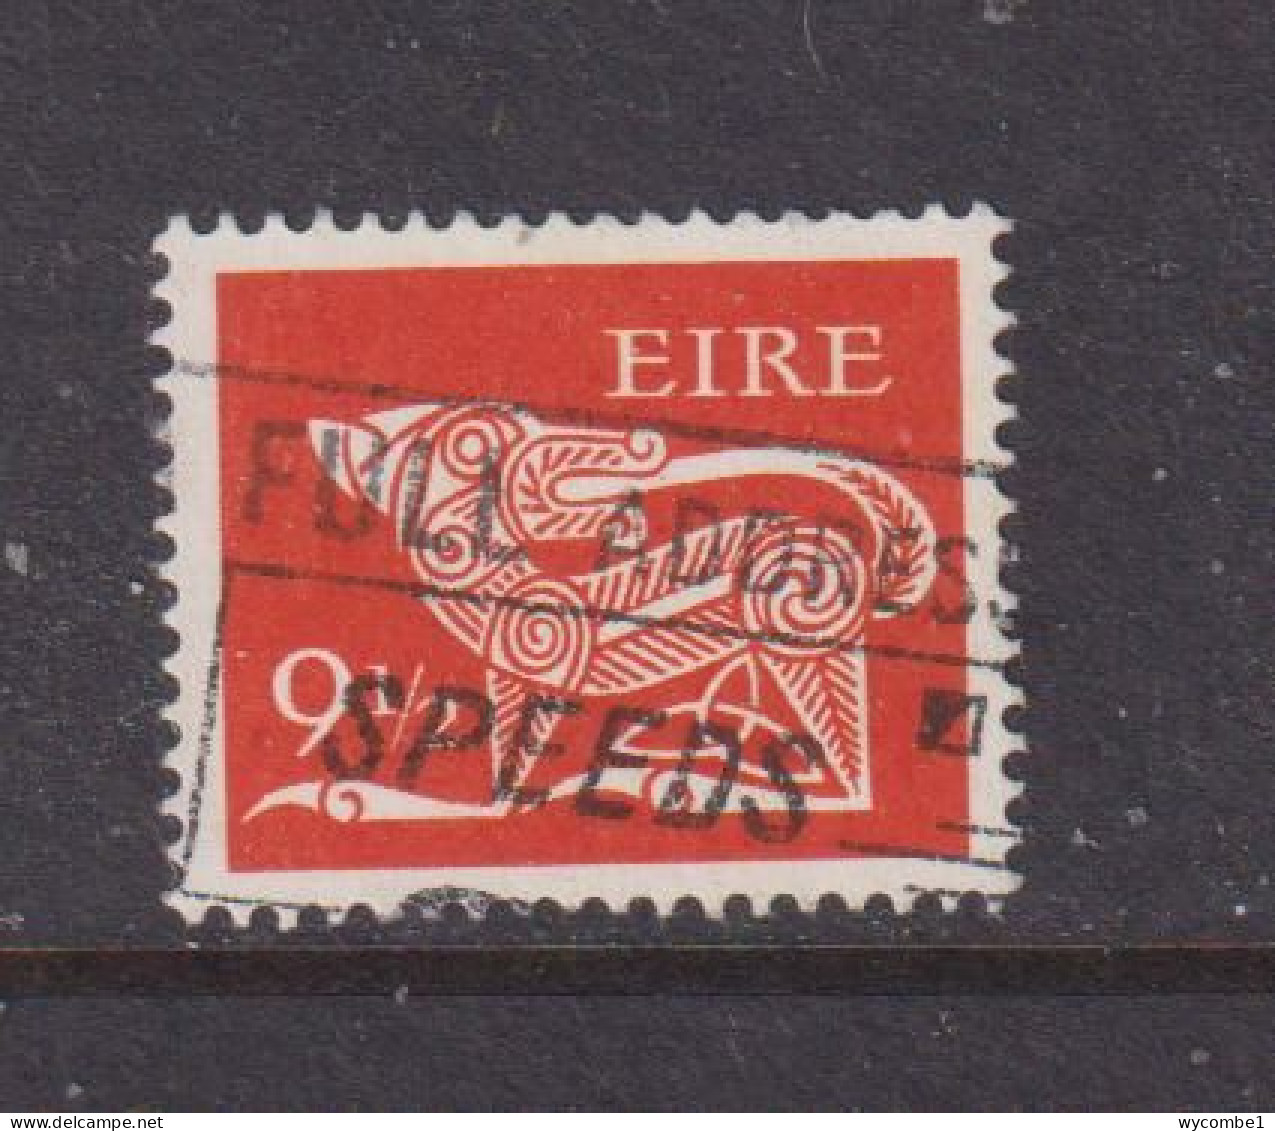 IRELAND - 1971  Decimal Currency Definitives  91/2p  Used As Scan - Used Stamps